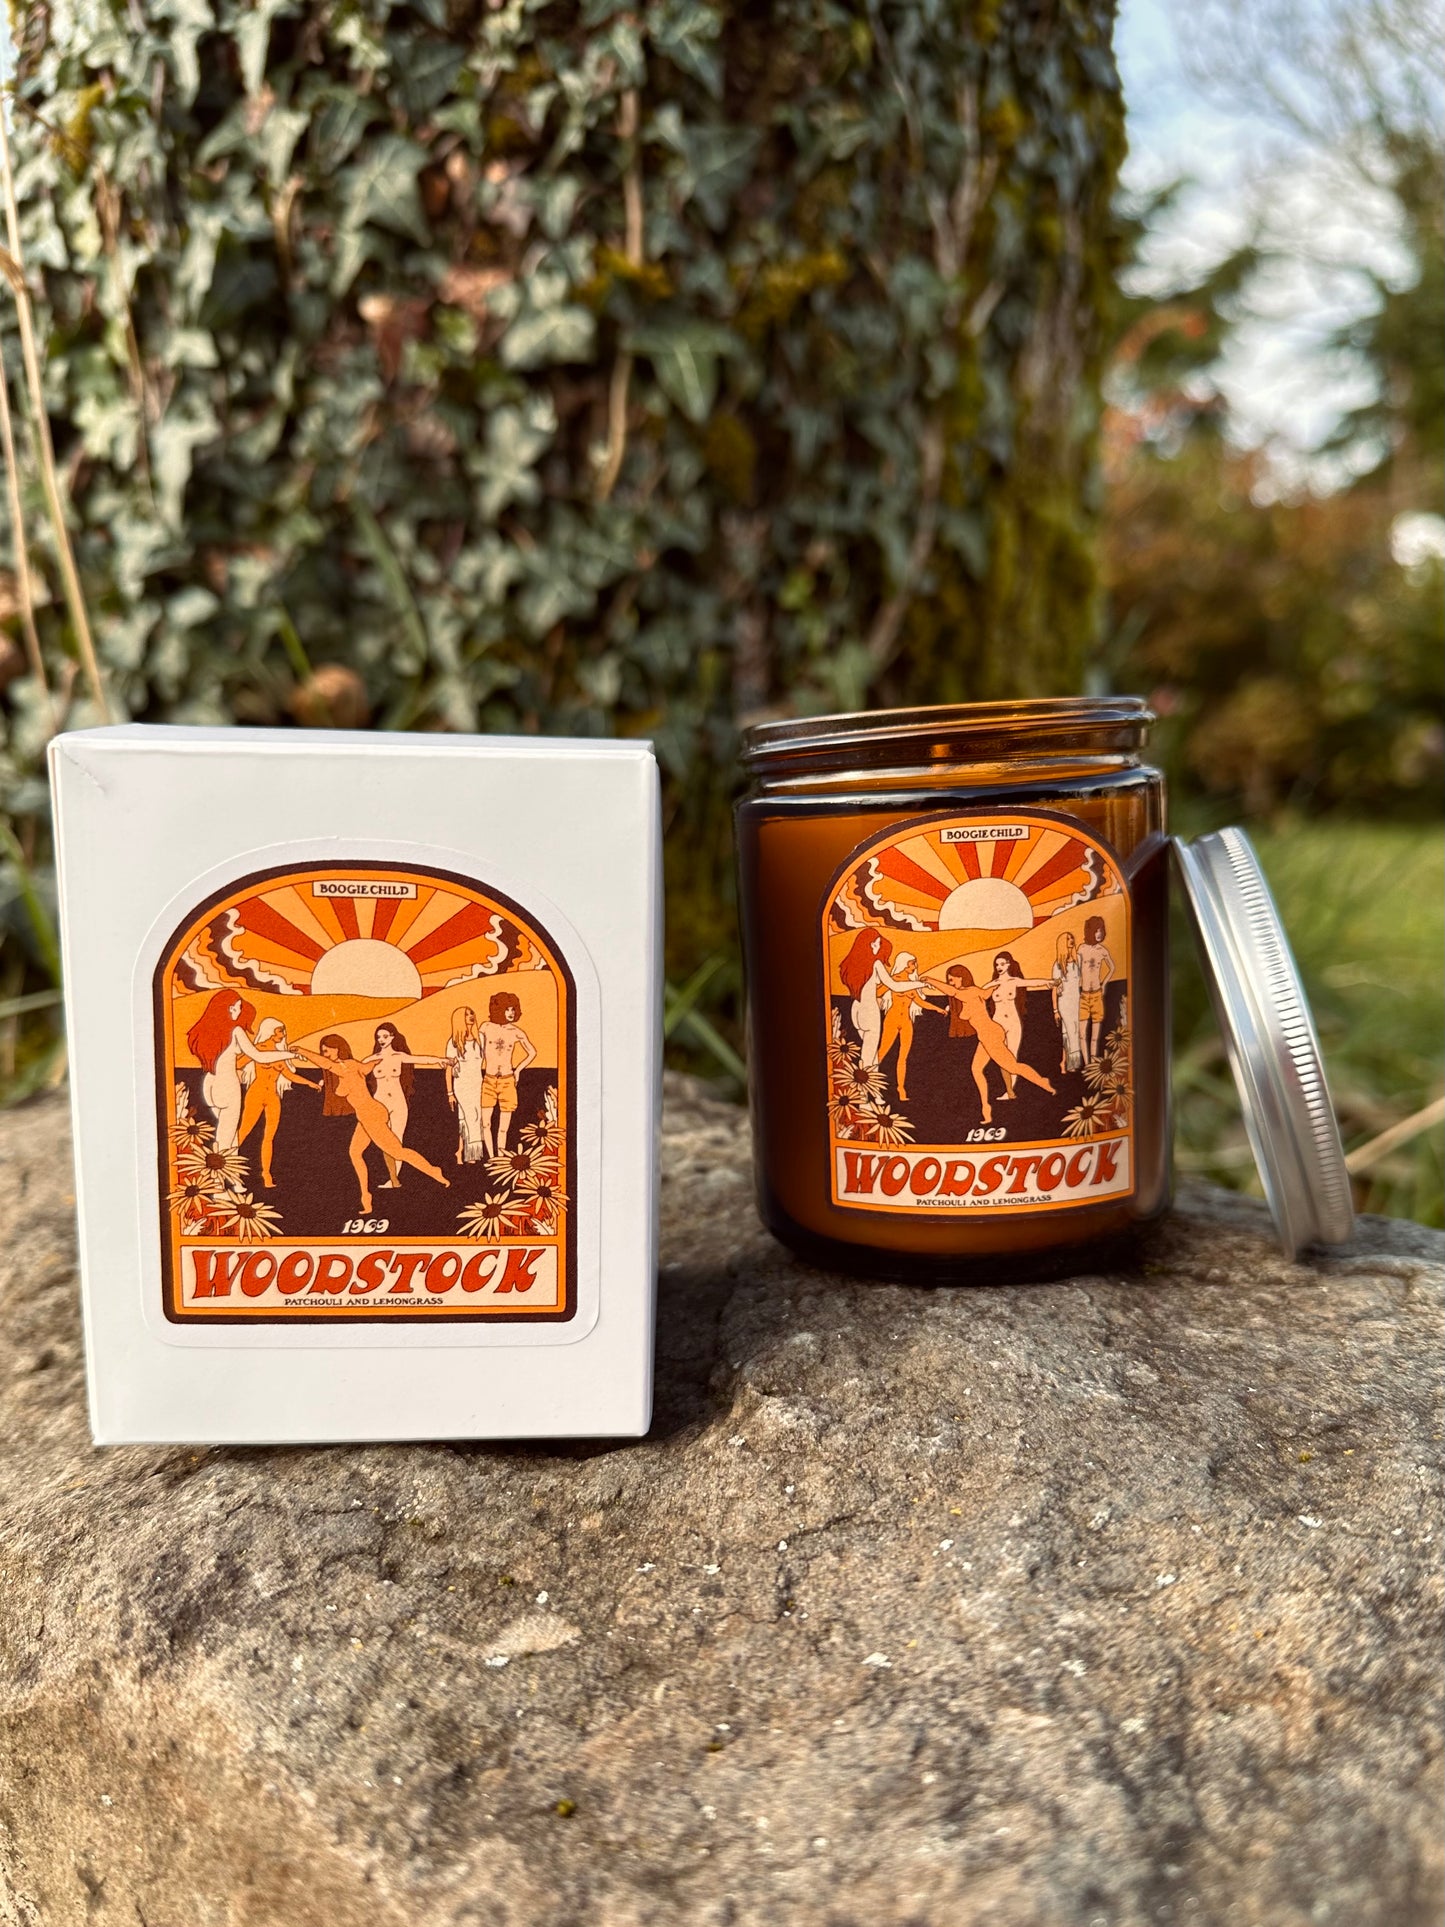 Load image into Gallery viewer, Woodstock 1969 Candle - Patchouli and Lemongrass
